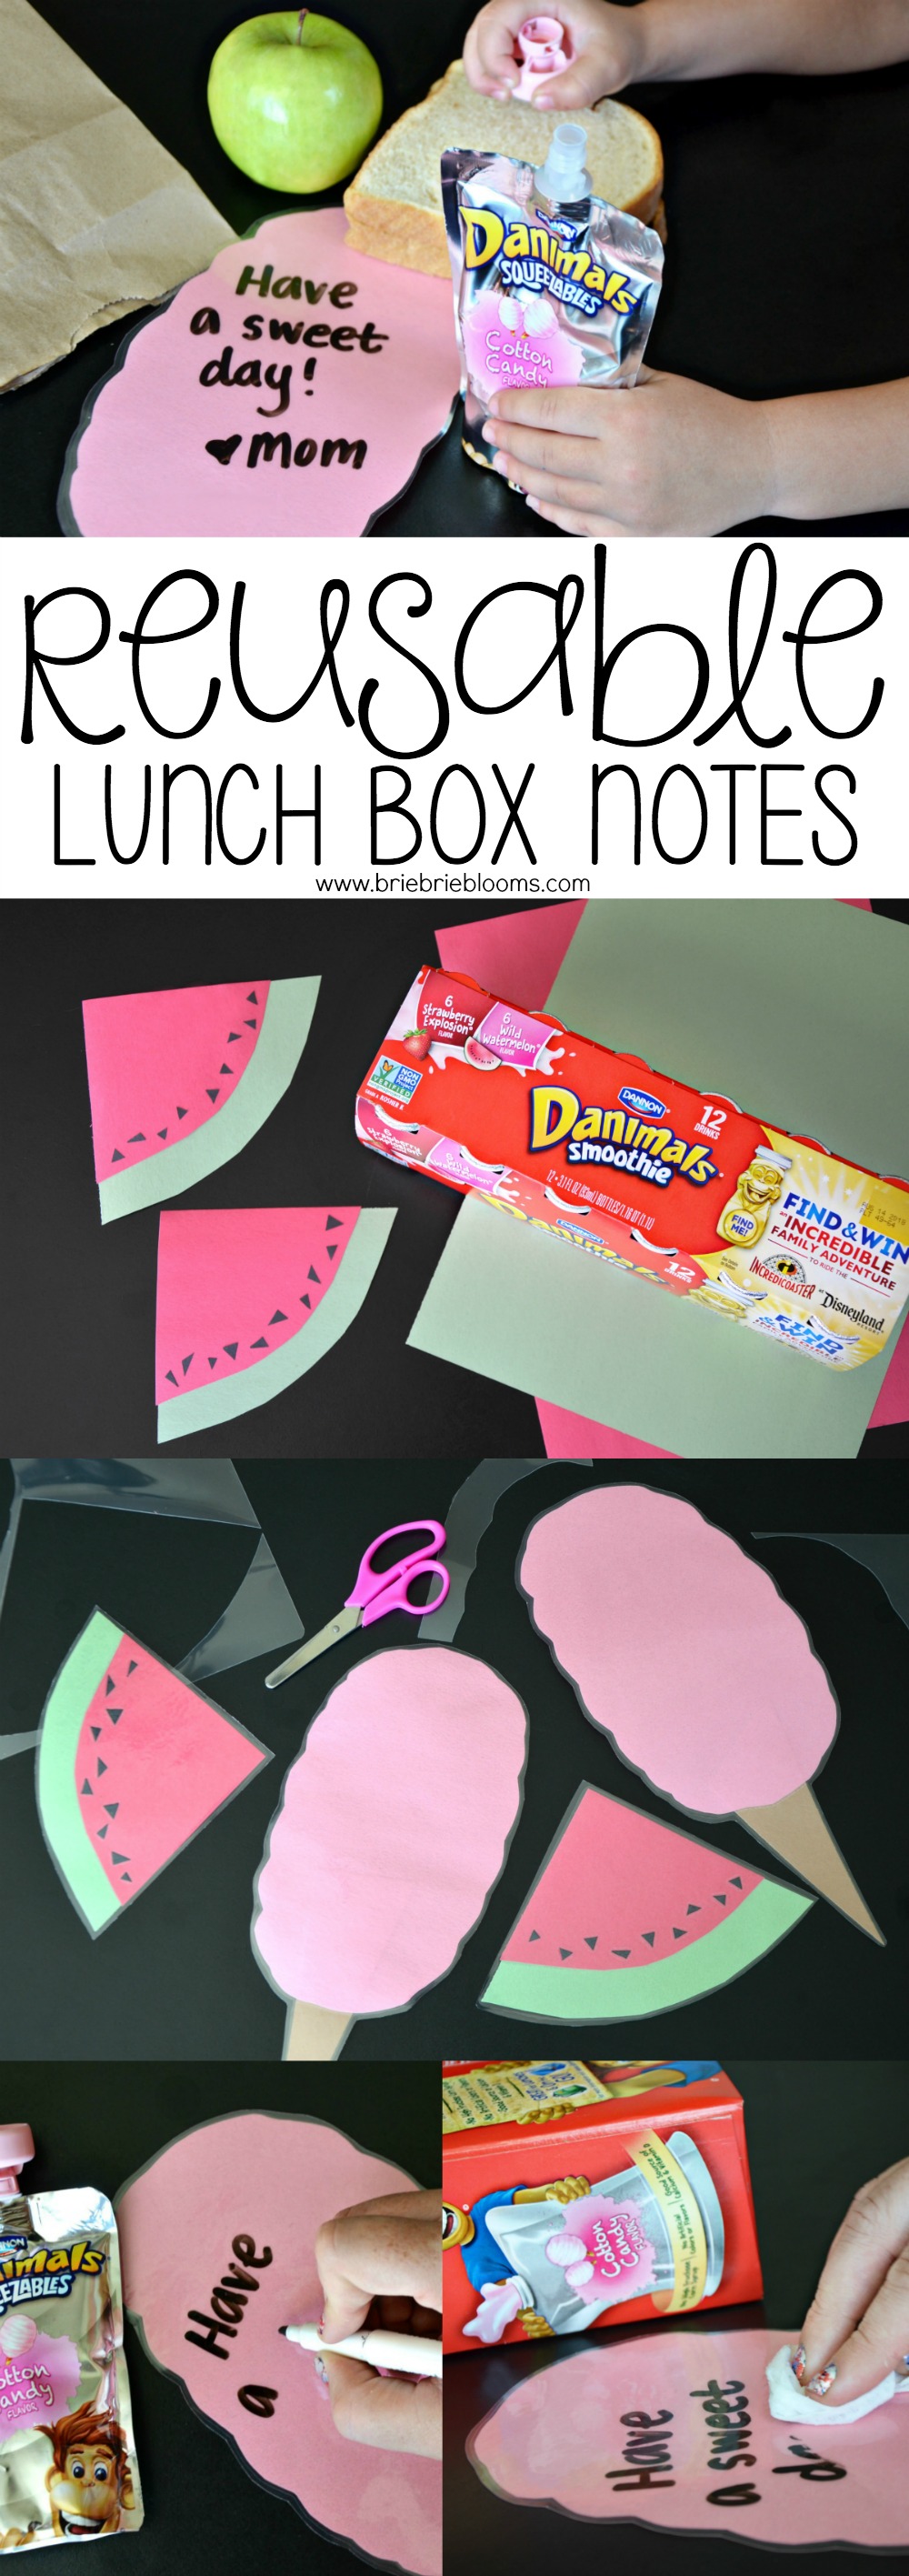 Make laminated reusable lunch box notes to reduce waste and have some fun packing your child's lunch box!